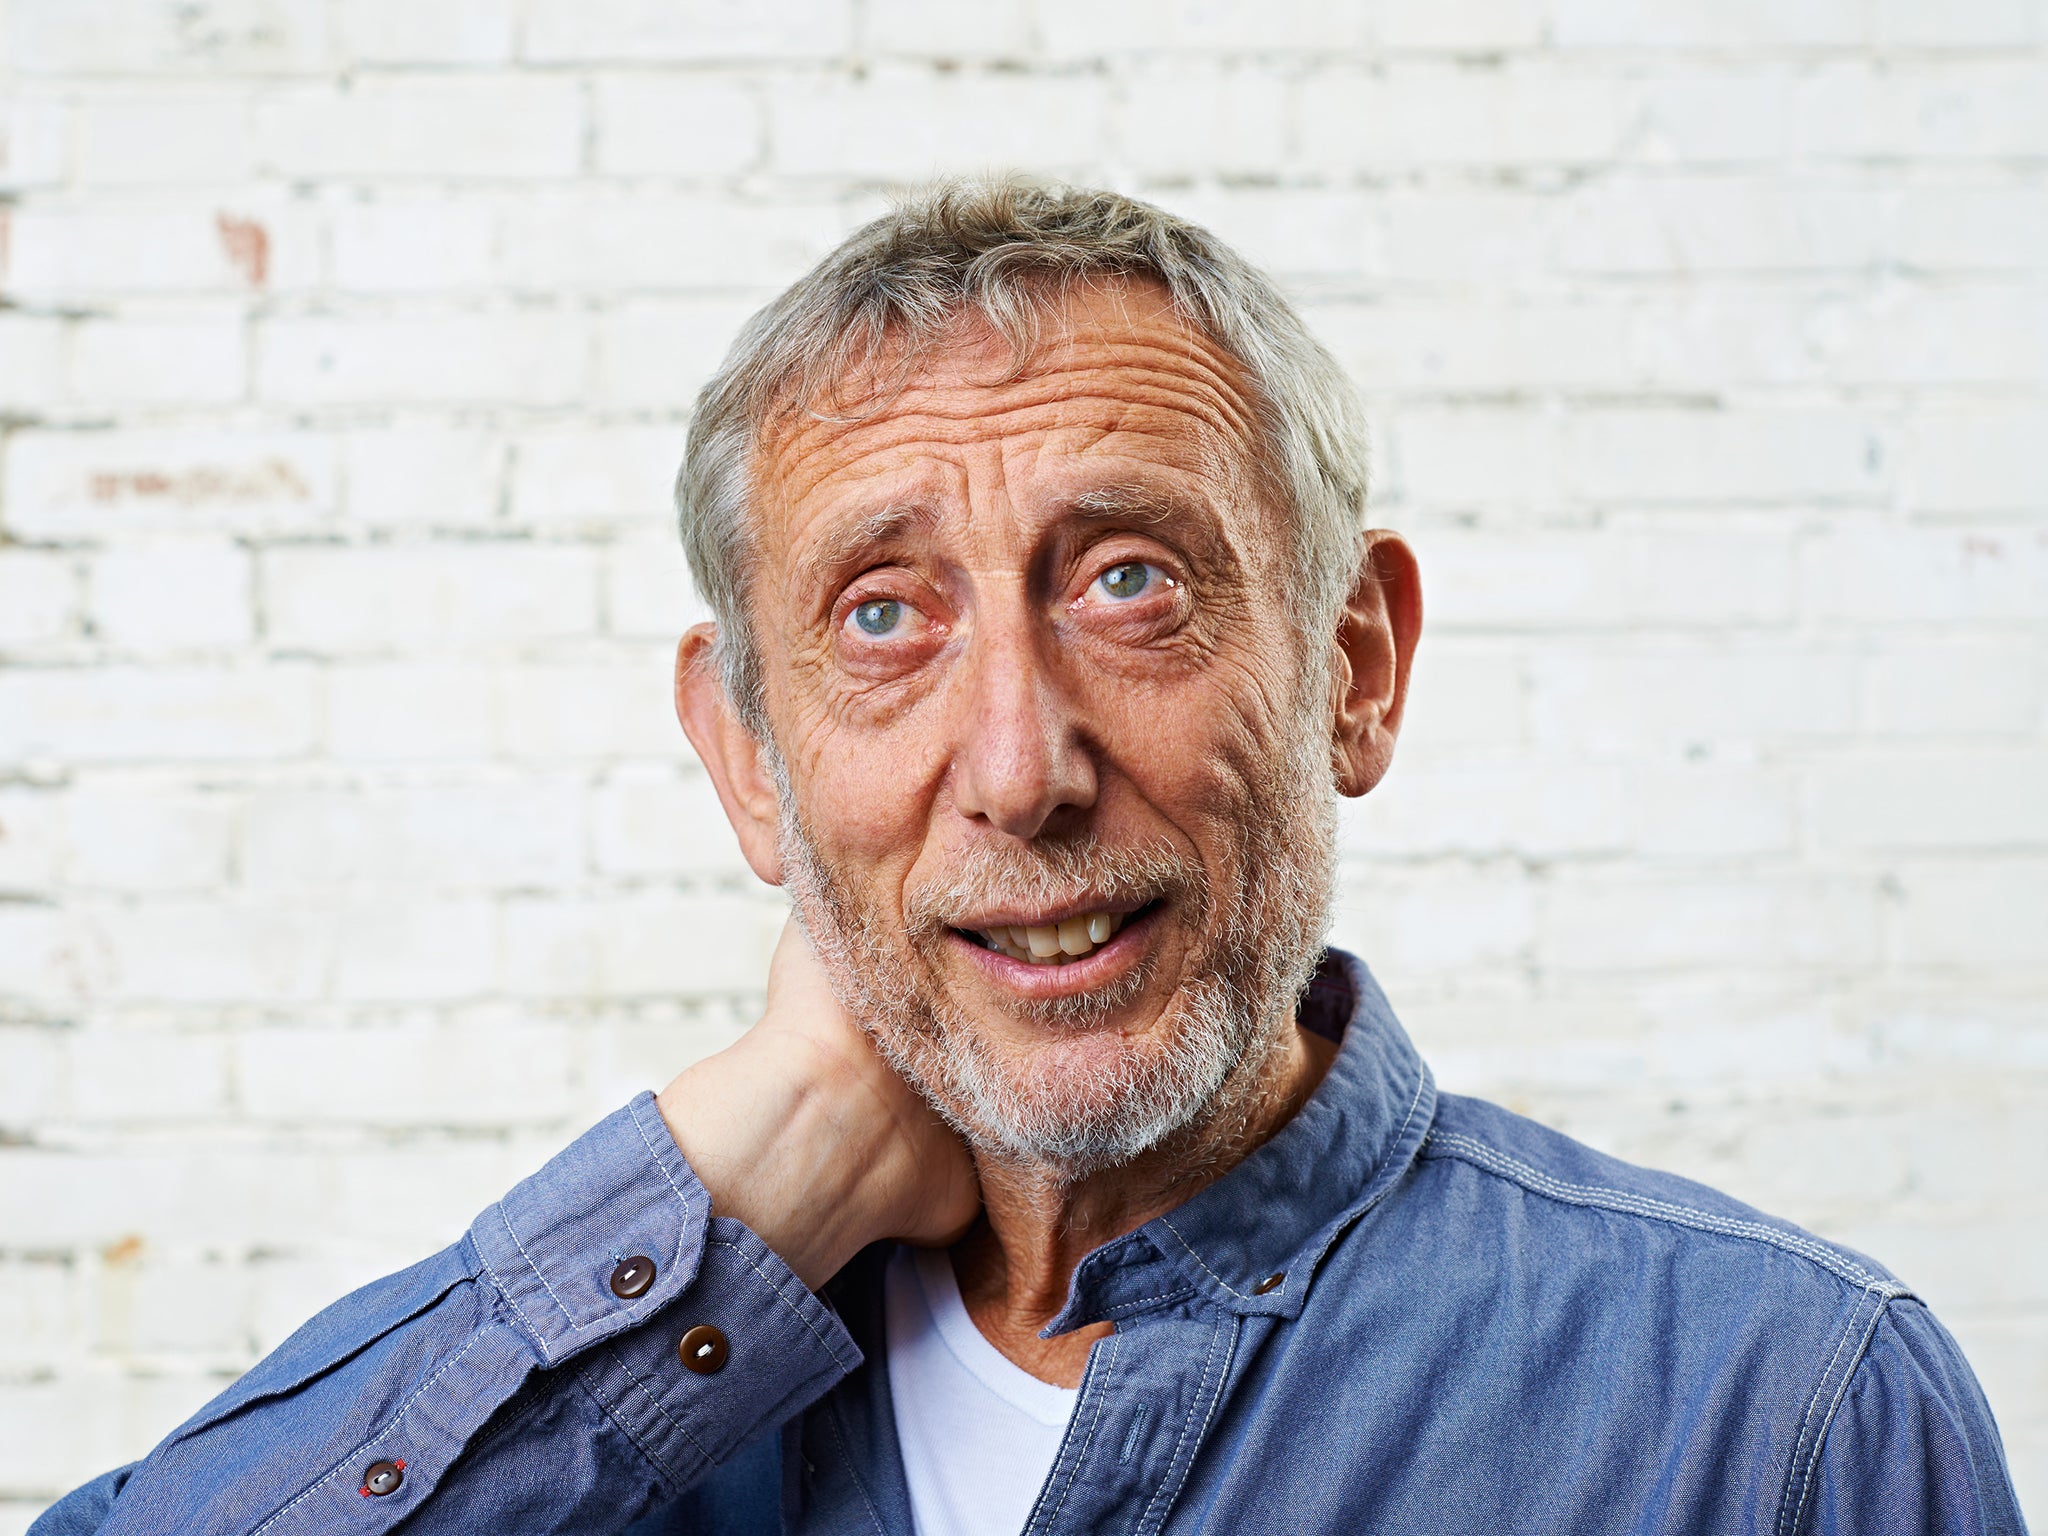 Children's author Michael Rosen is among the signatories of a letter stating concern at the extreme pressure placed on school pupils